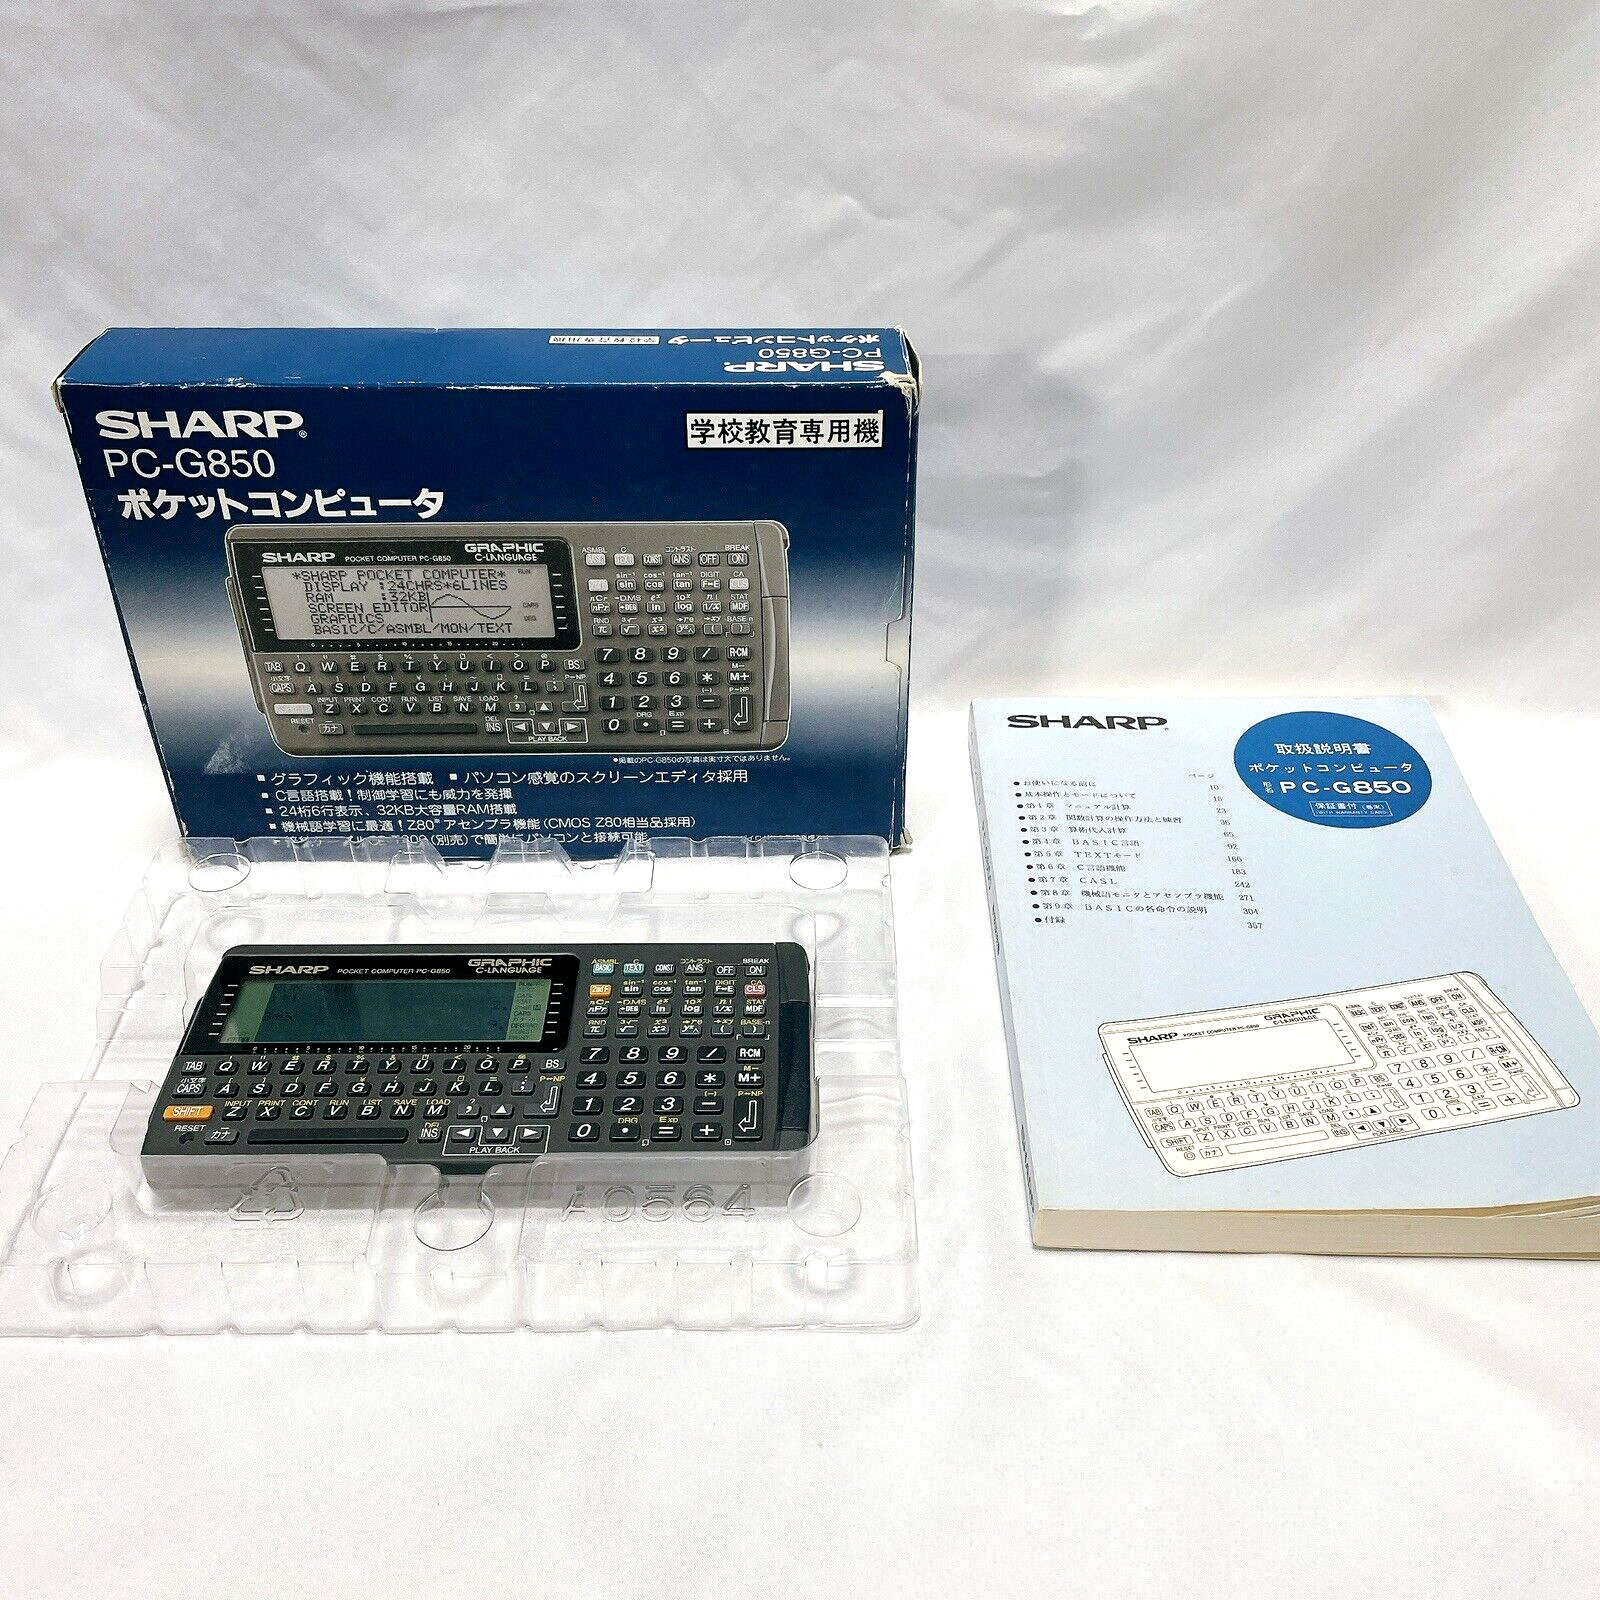 Pocket Computer PC-G850 Sharp w/ Box & Manual Working Tested from Japan